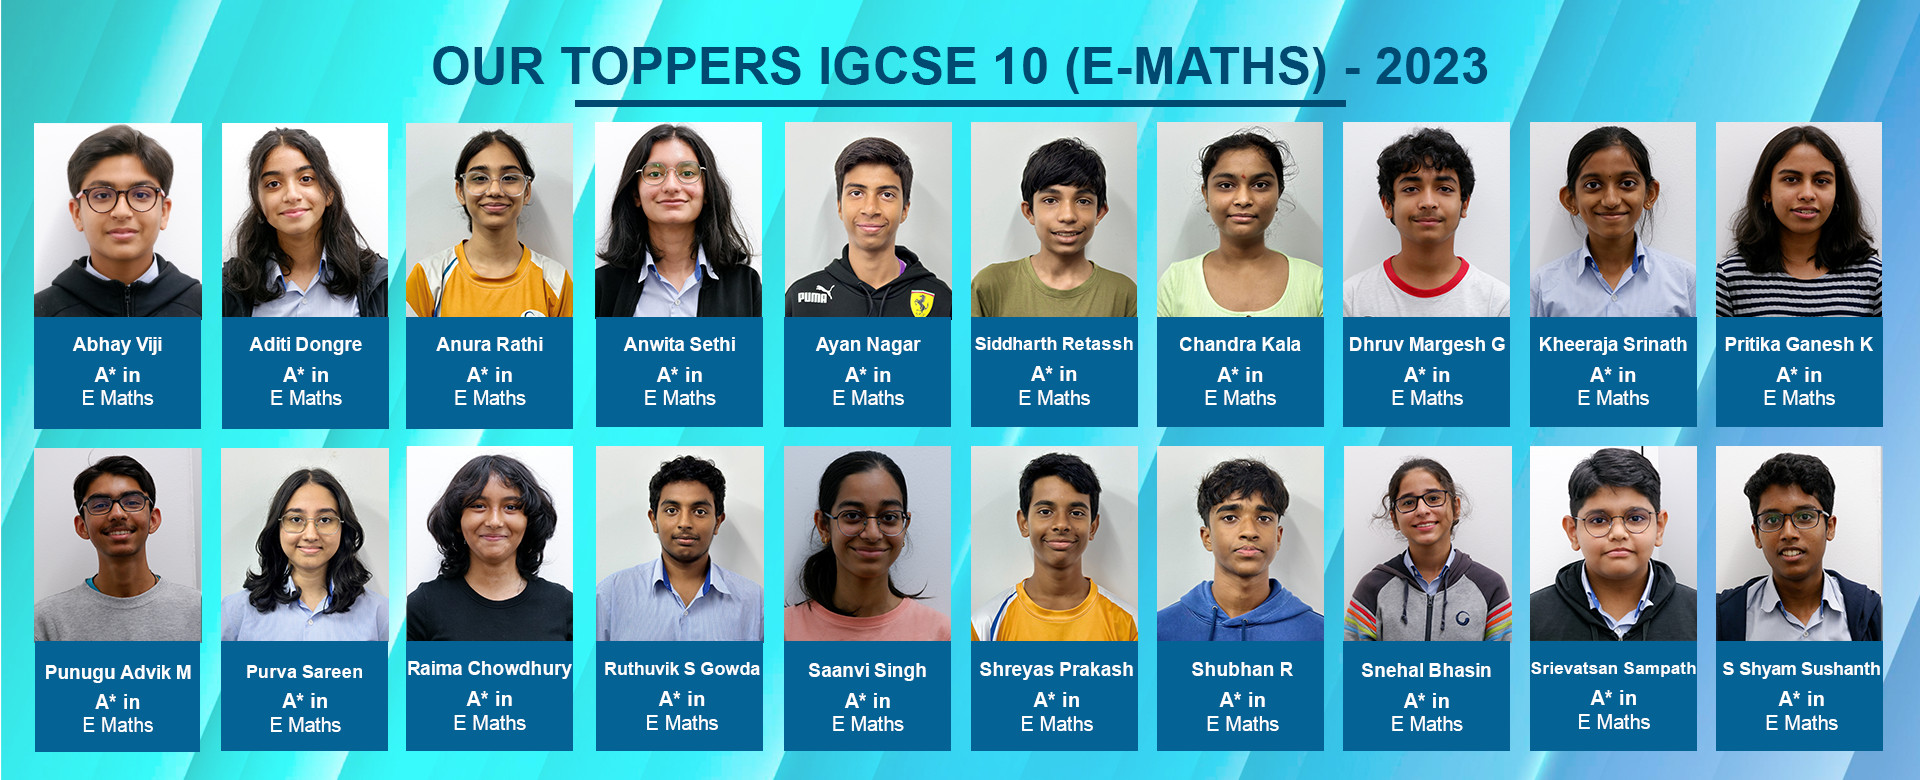 IGCSE 10 Extended Maths Toppers - 2023